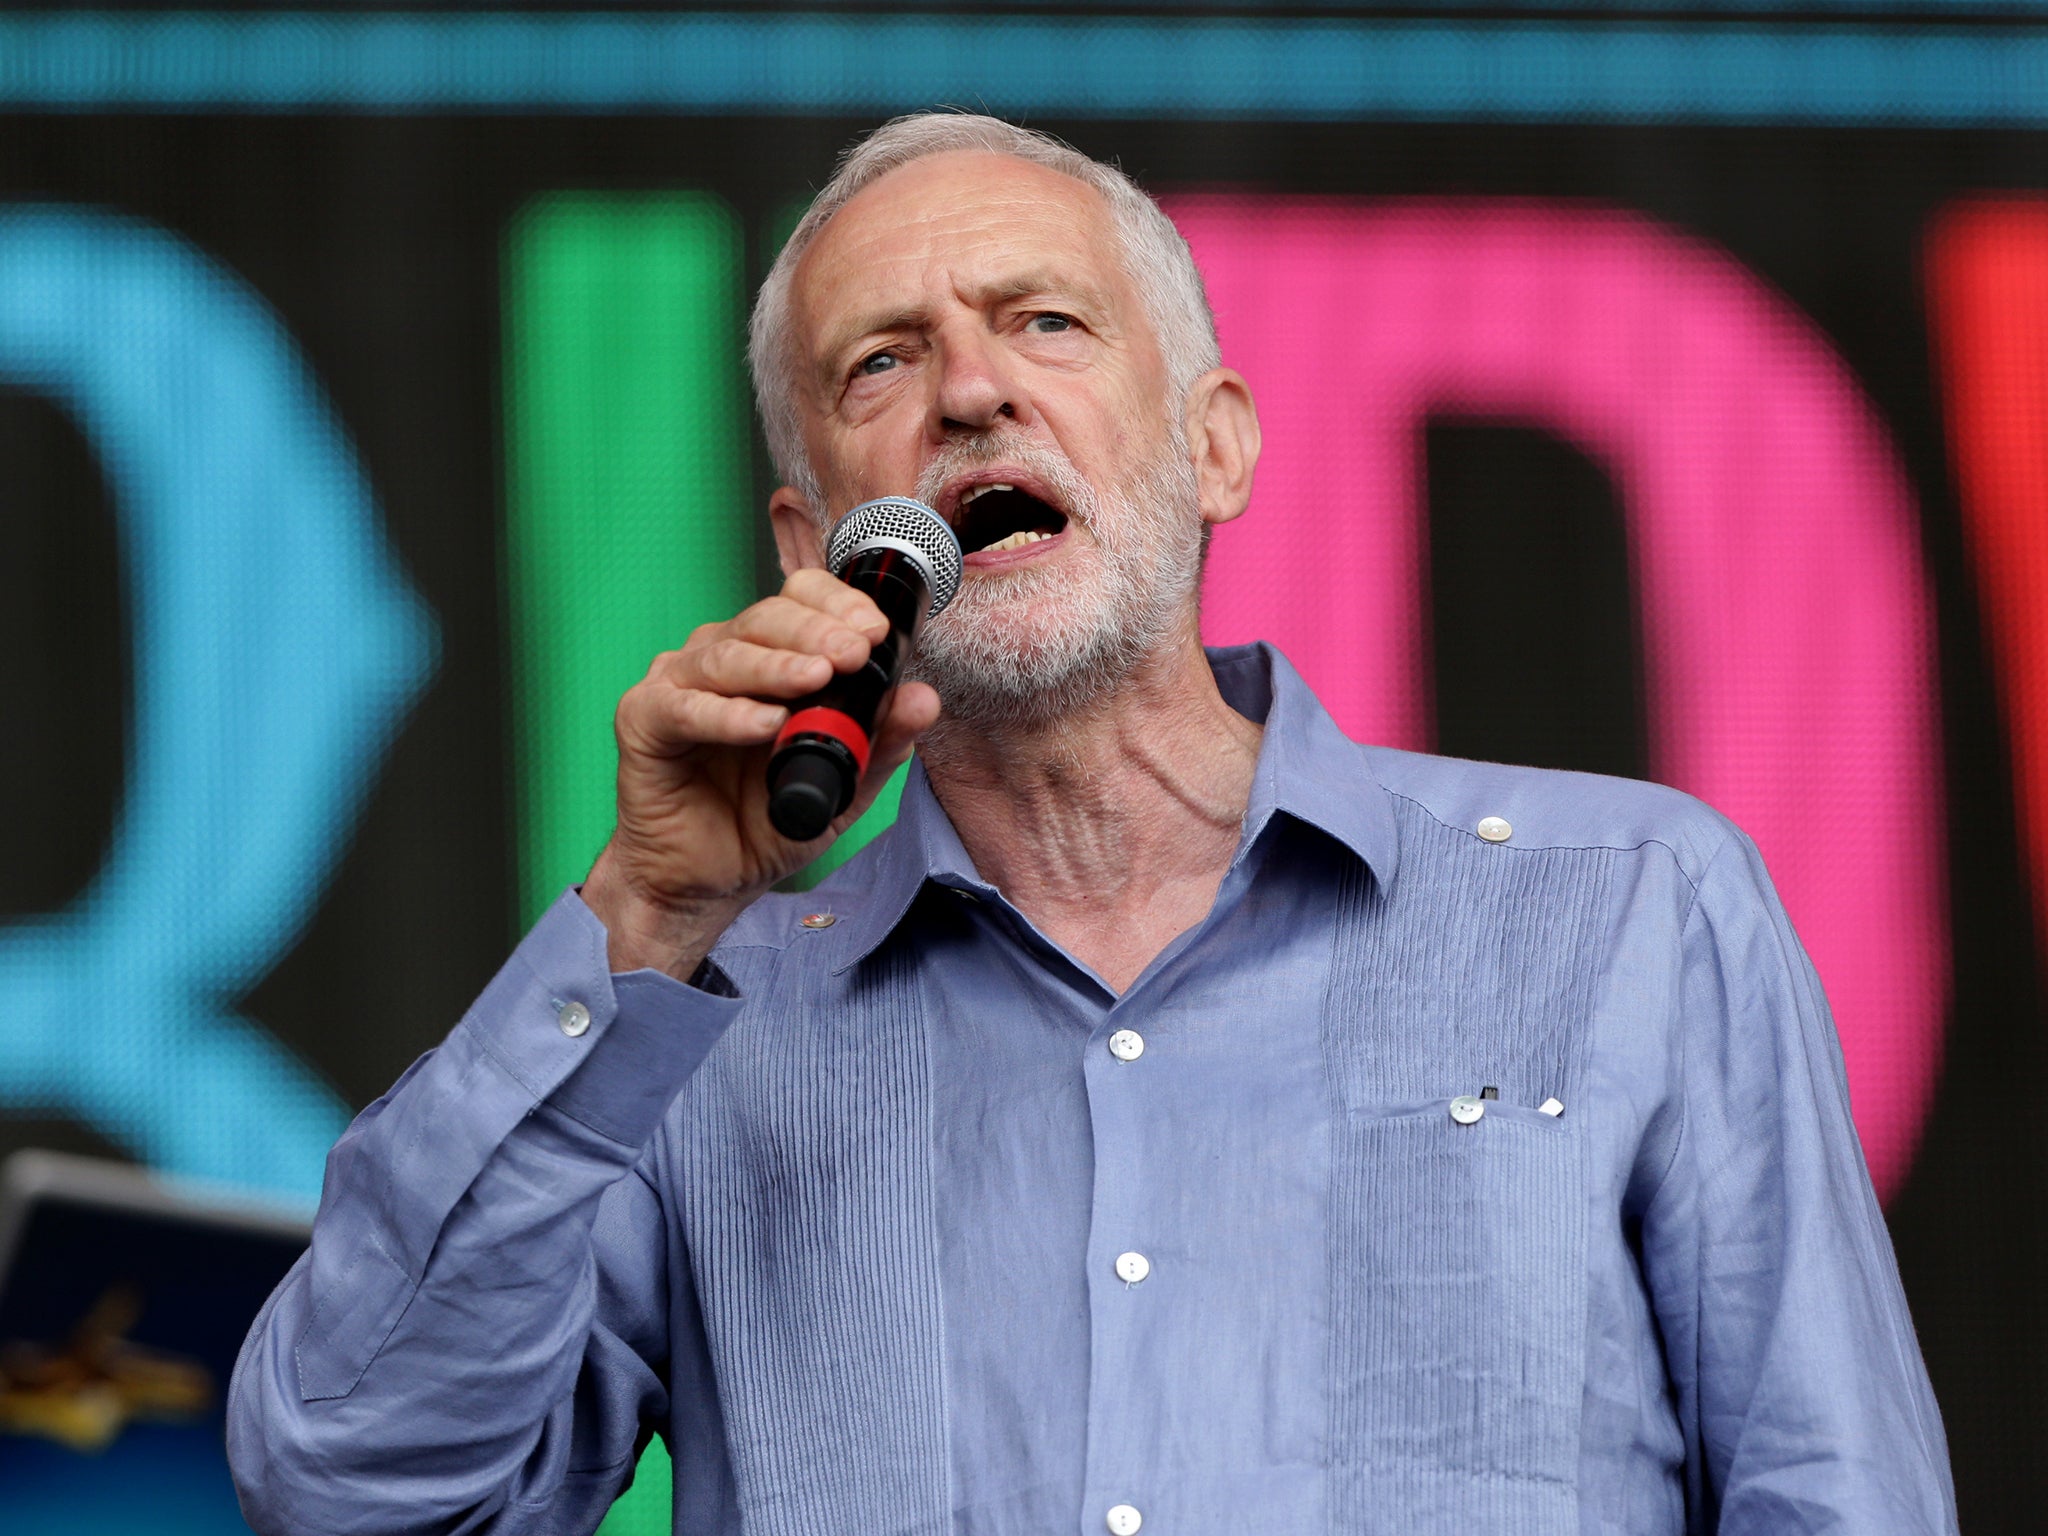 The Labour leader's support at Glastonbury shows it is possible to engage young people in politics